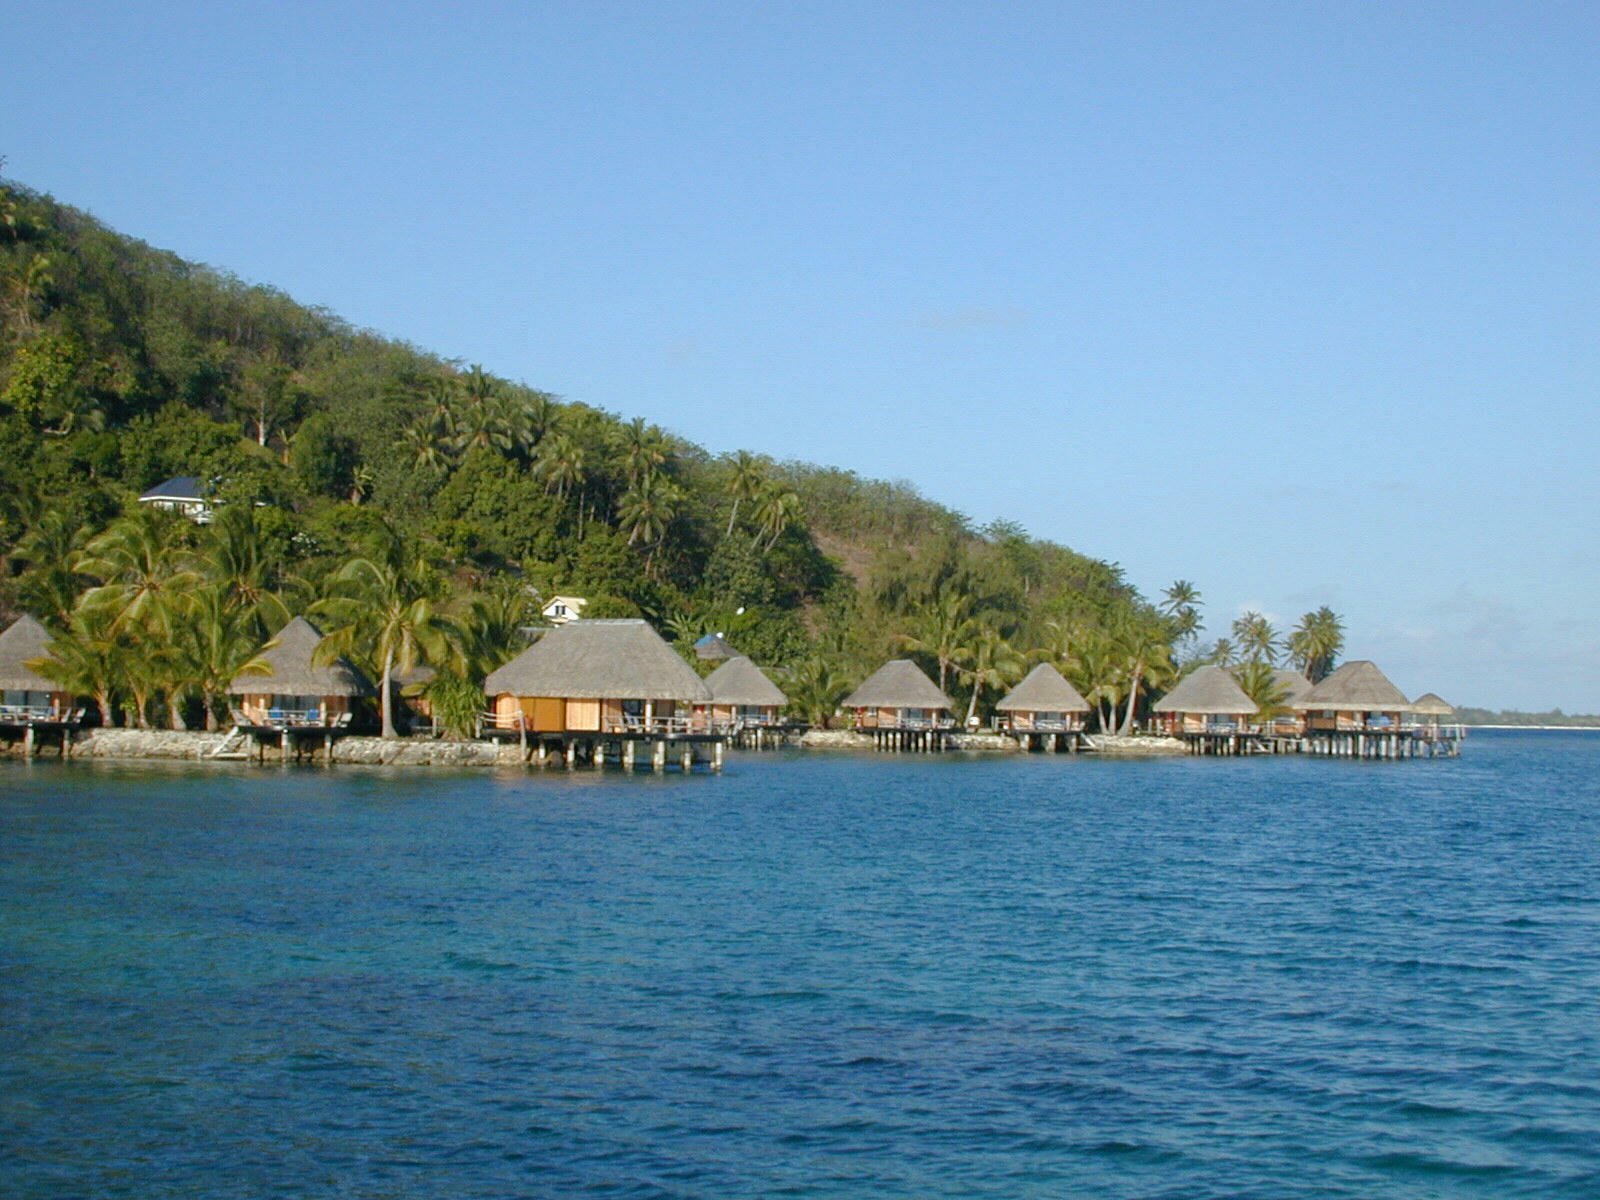 houses line the shore of the ocean near a tropical forest